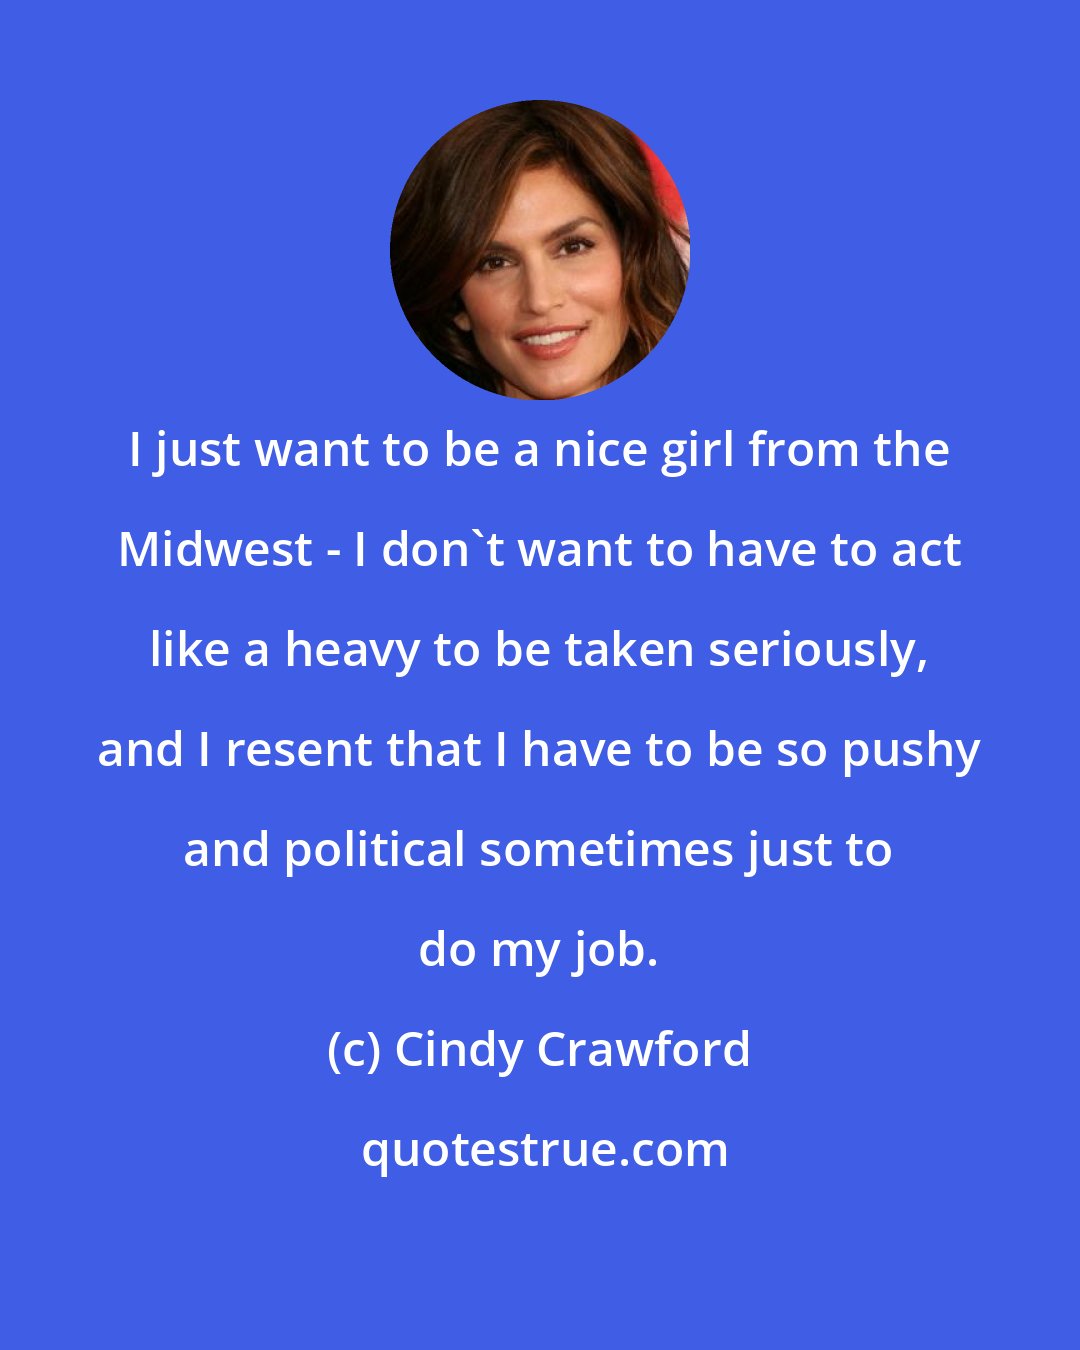 Cindy Crawford: I just want to be a nice girl from the Midwest - I don't want to have to act like a heavy to be taken seriously, and I resent that I have to be so pushy and political sometimes just to do my job.